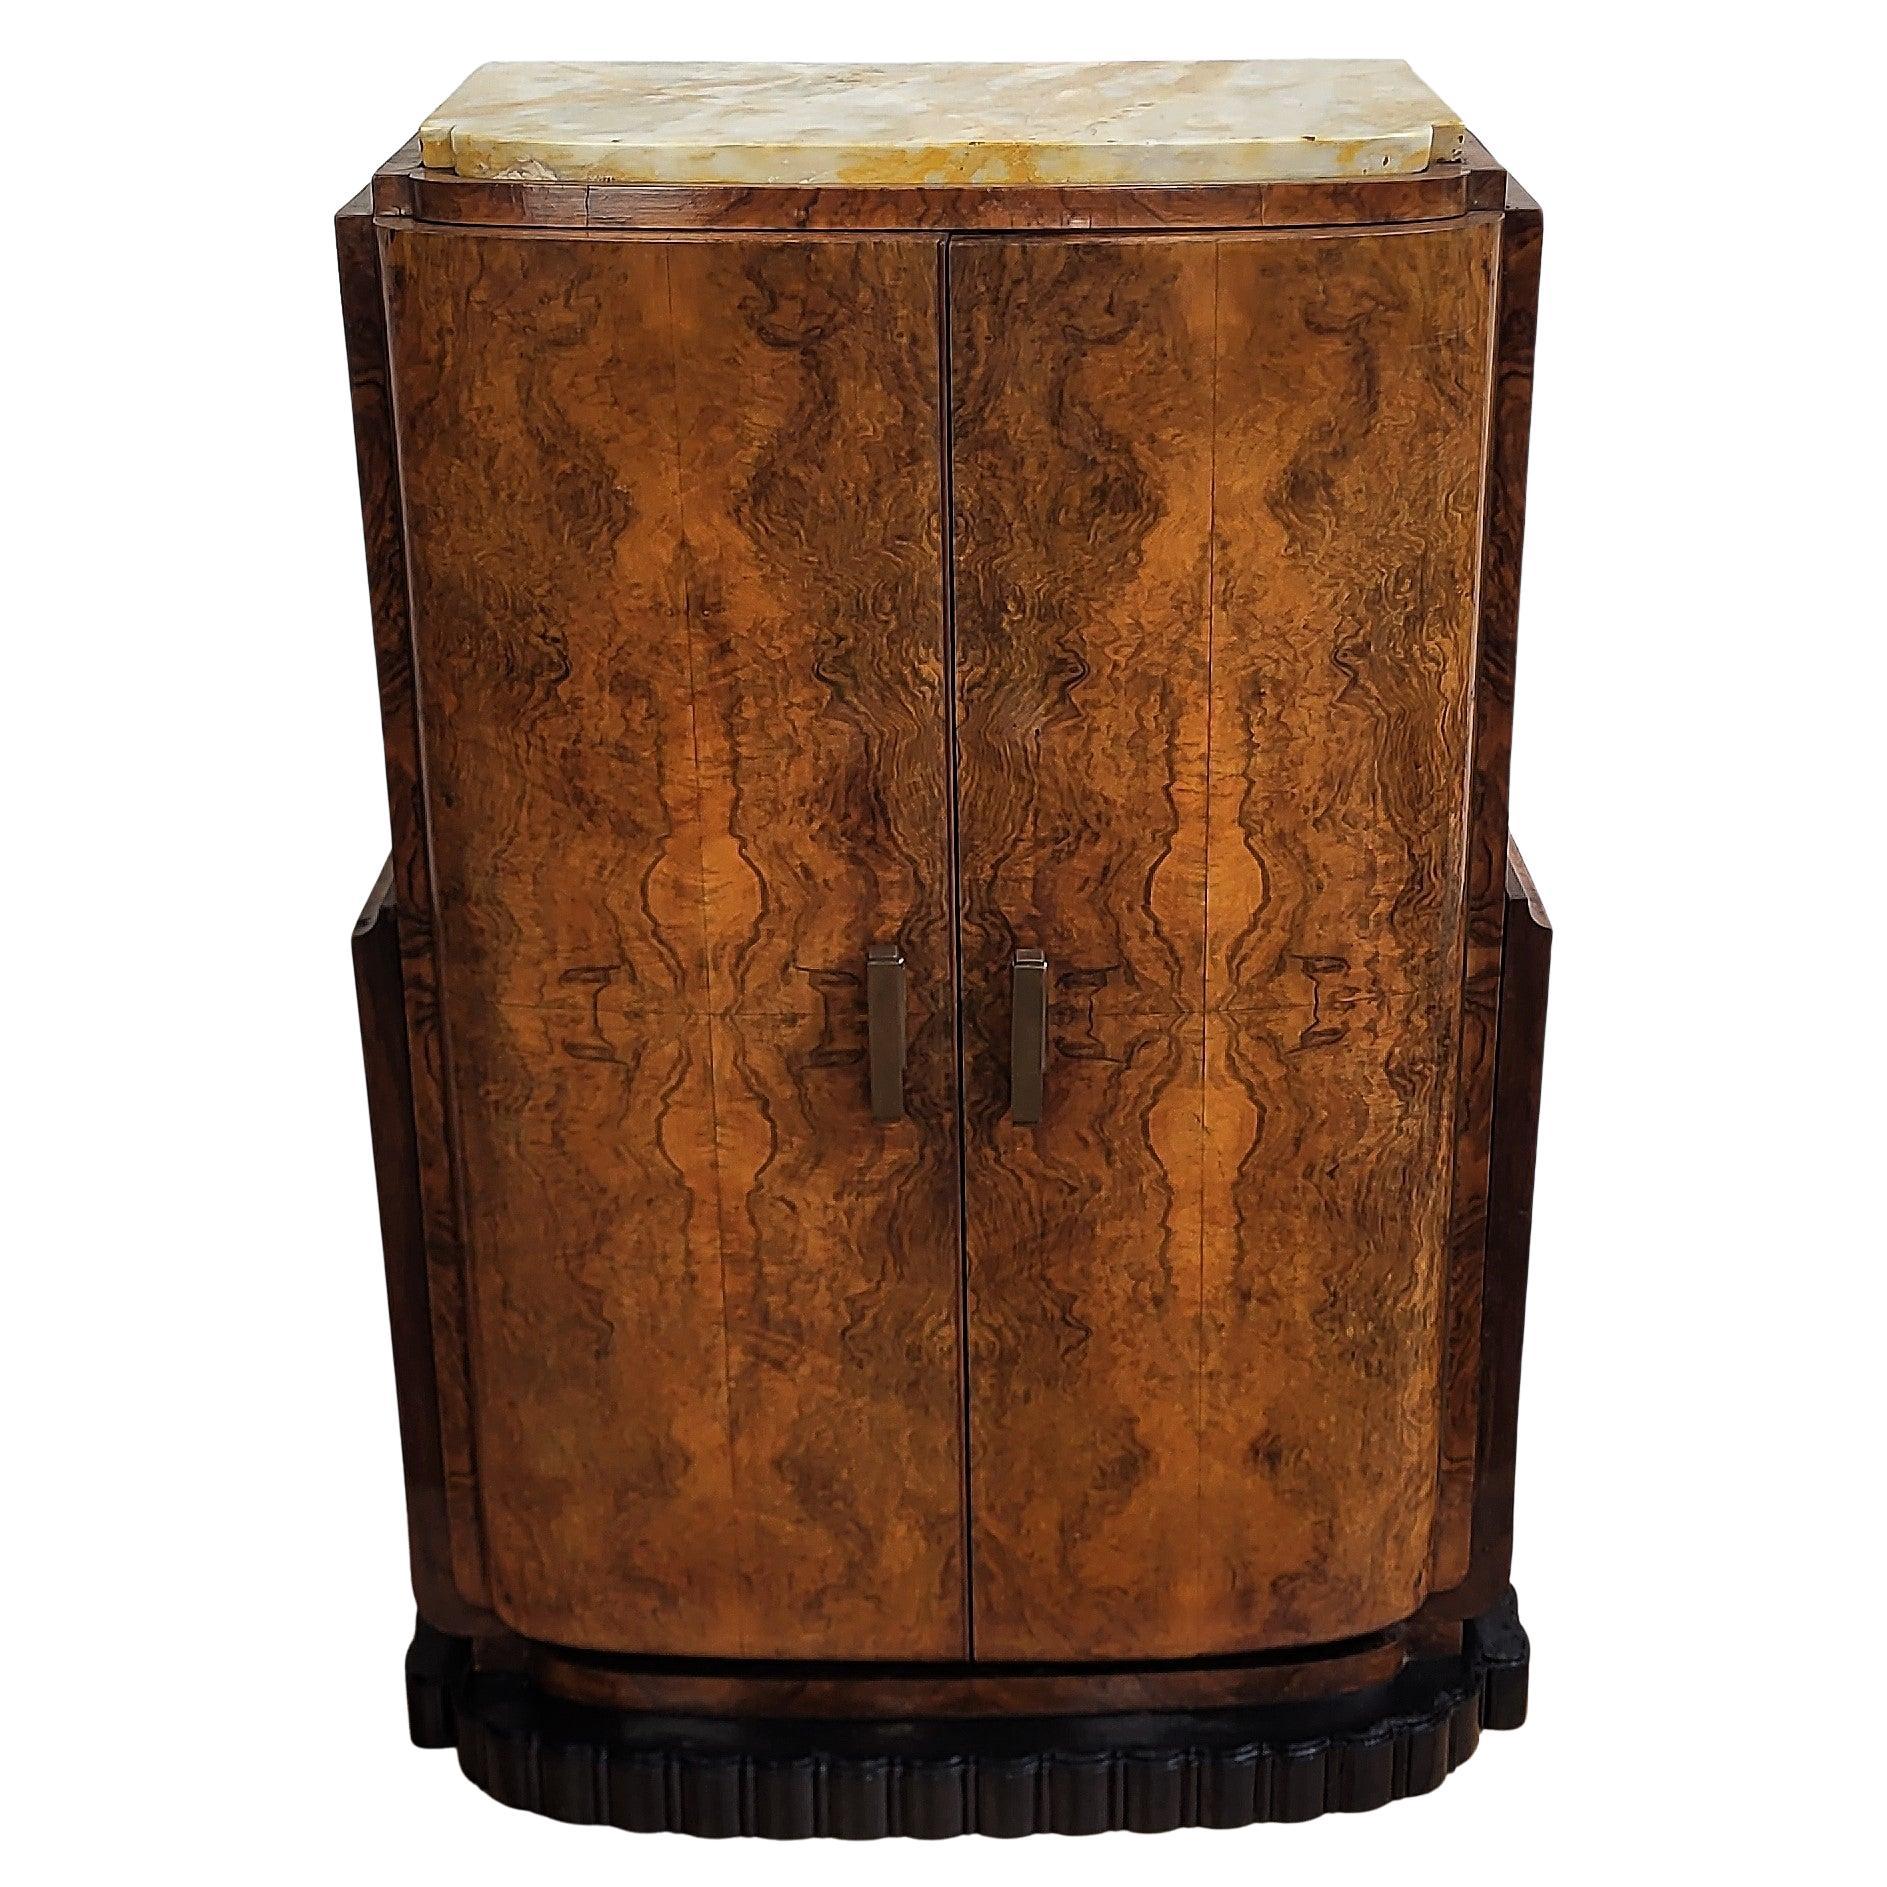 1950s Italian Art Deco Burl Wood and Marble Top Cabinet Bar Credenza Sideboard For Sale